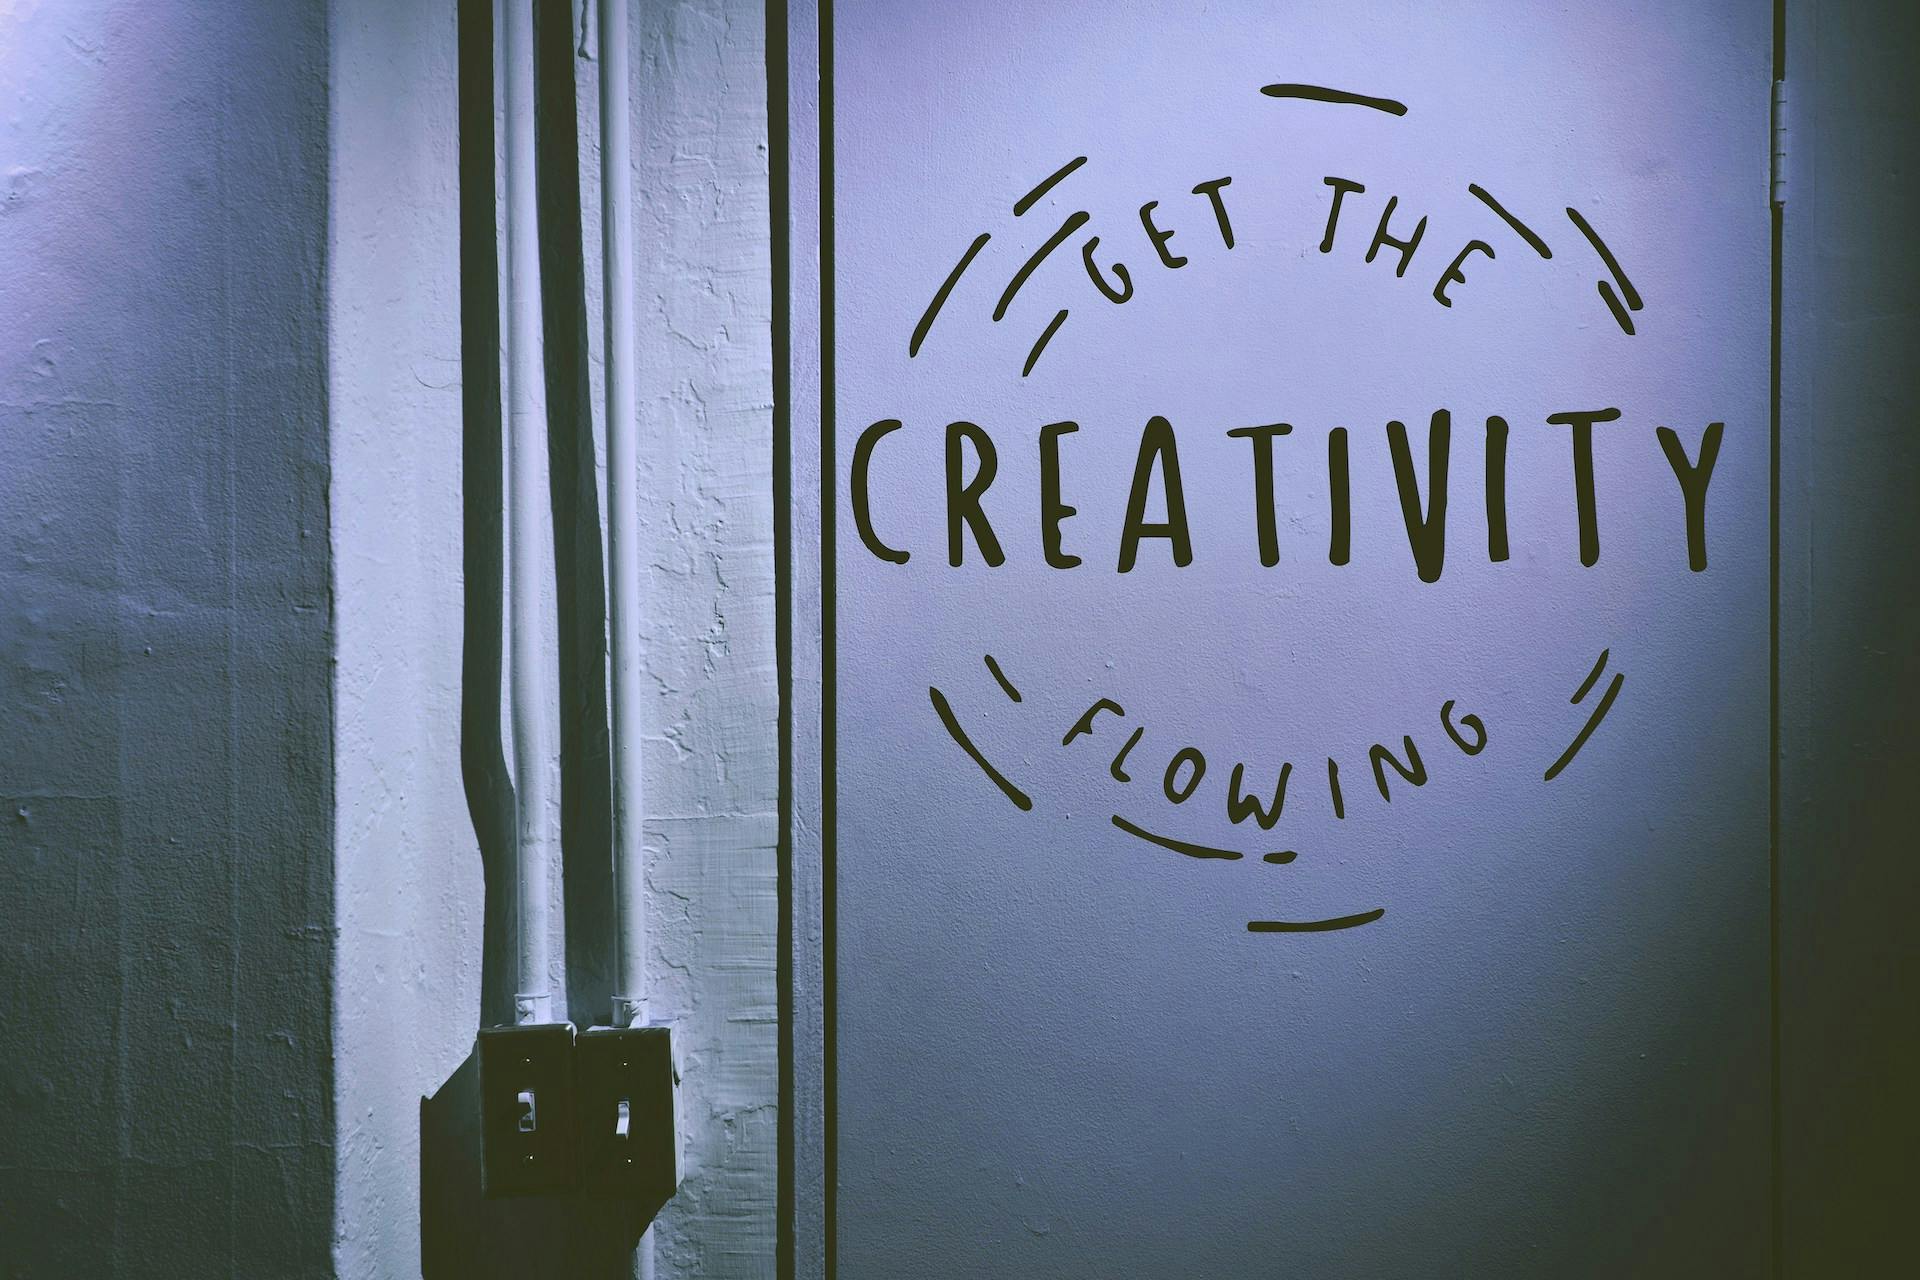 Creativity is another important skill that TEFL teachers need